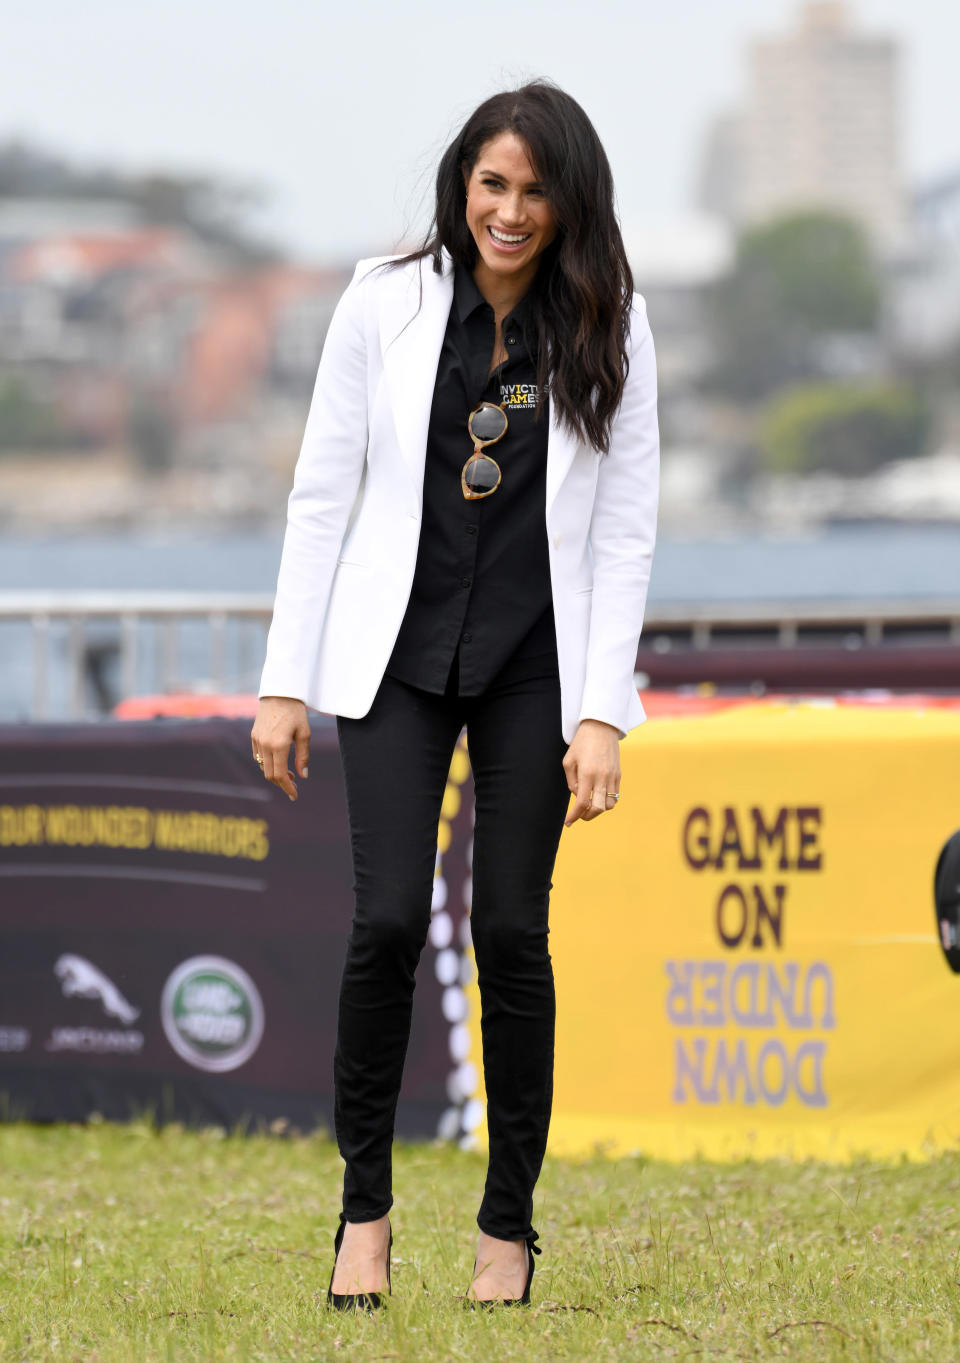 <p>For an Invictus Games event on day six of the couple’s Australian royal tour, Meghan teamed a white Altuzarra blazer with an Invictus Sydney shirt. She finished the look with £159 Mother Demin jeans, $240 (approx £184) Illesteva sunglasses and her go-to £566 Tabitha Simmons pumps. <em>[Photo: Getty]</em> </p>